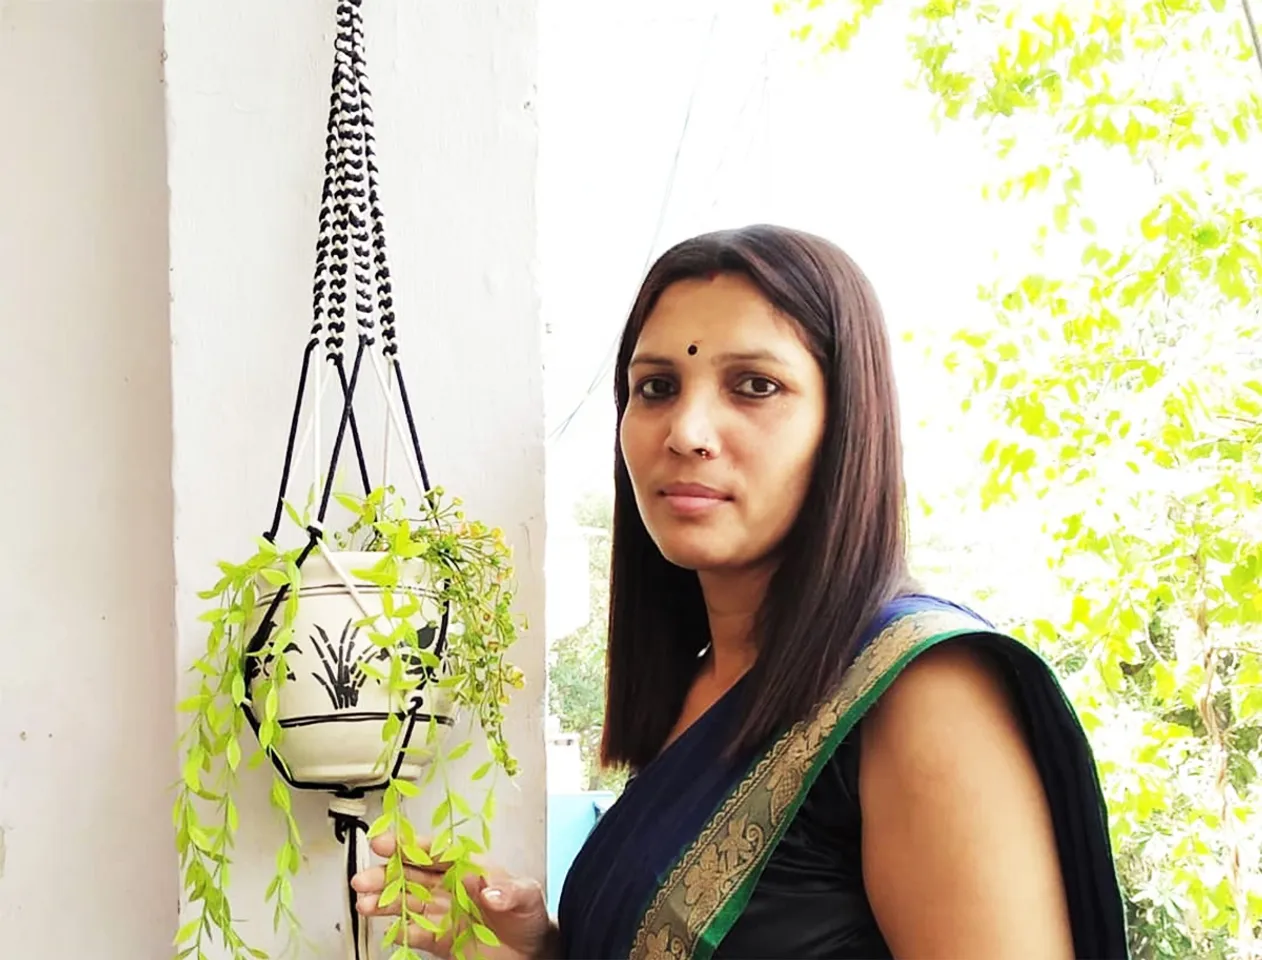 Pooja Kanth set up her eponymous handicrafts business in 2015